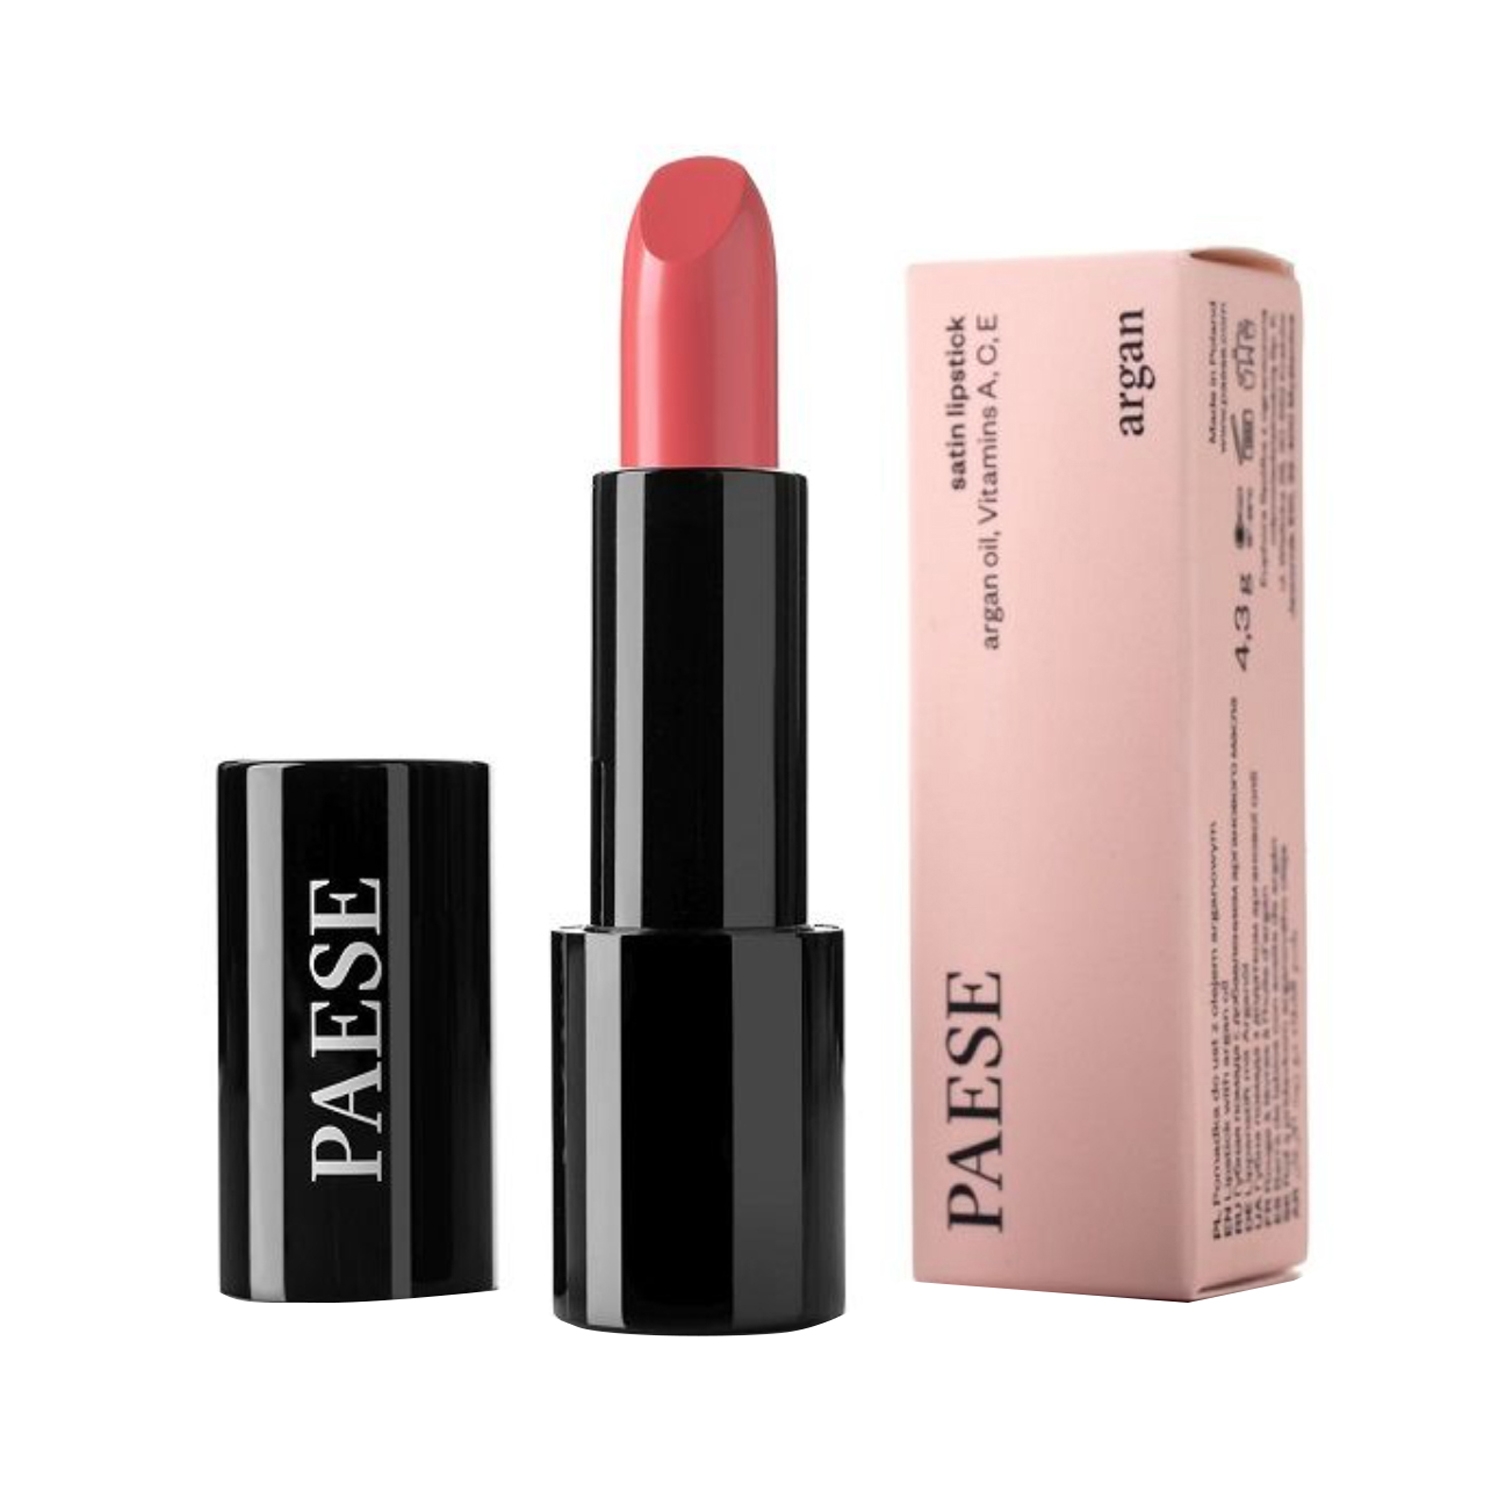 Paese Cosmetics Lipstick with Argan Oil - 75 Nude (4.3g)